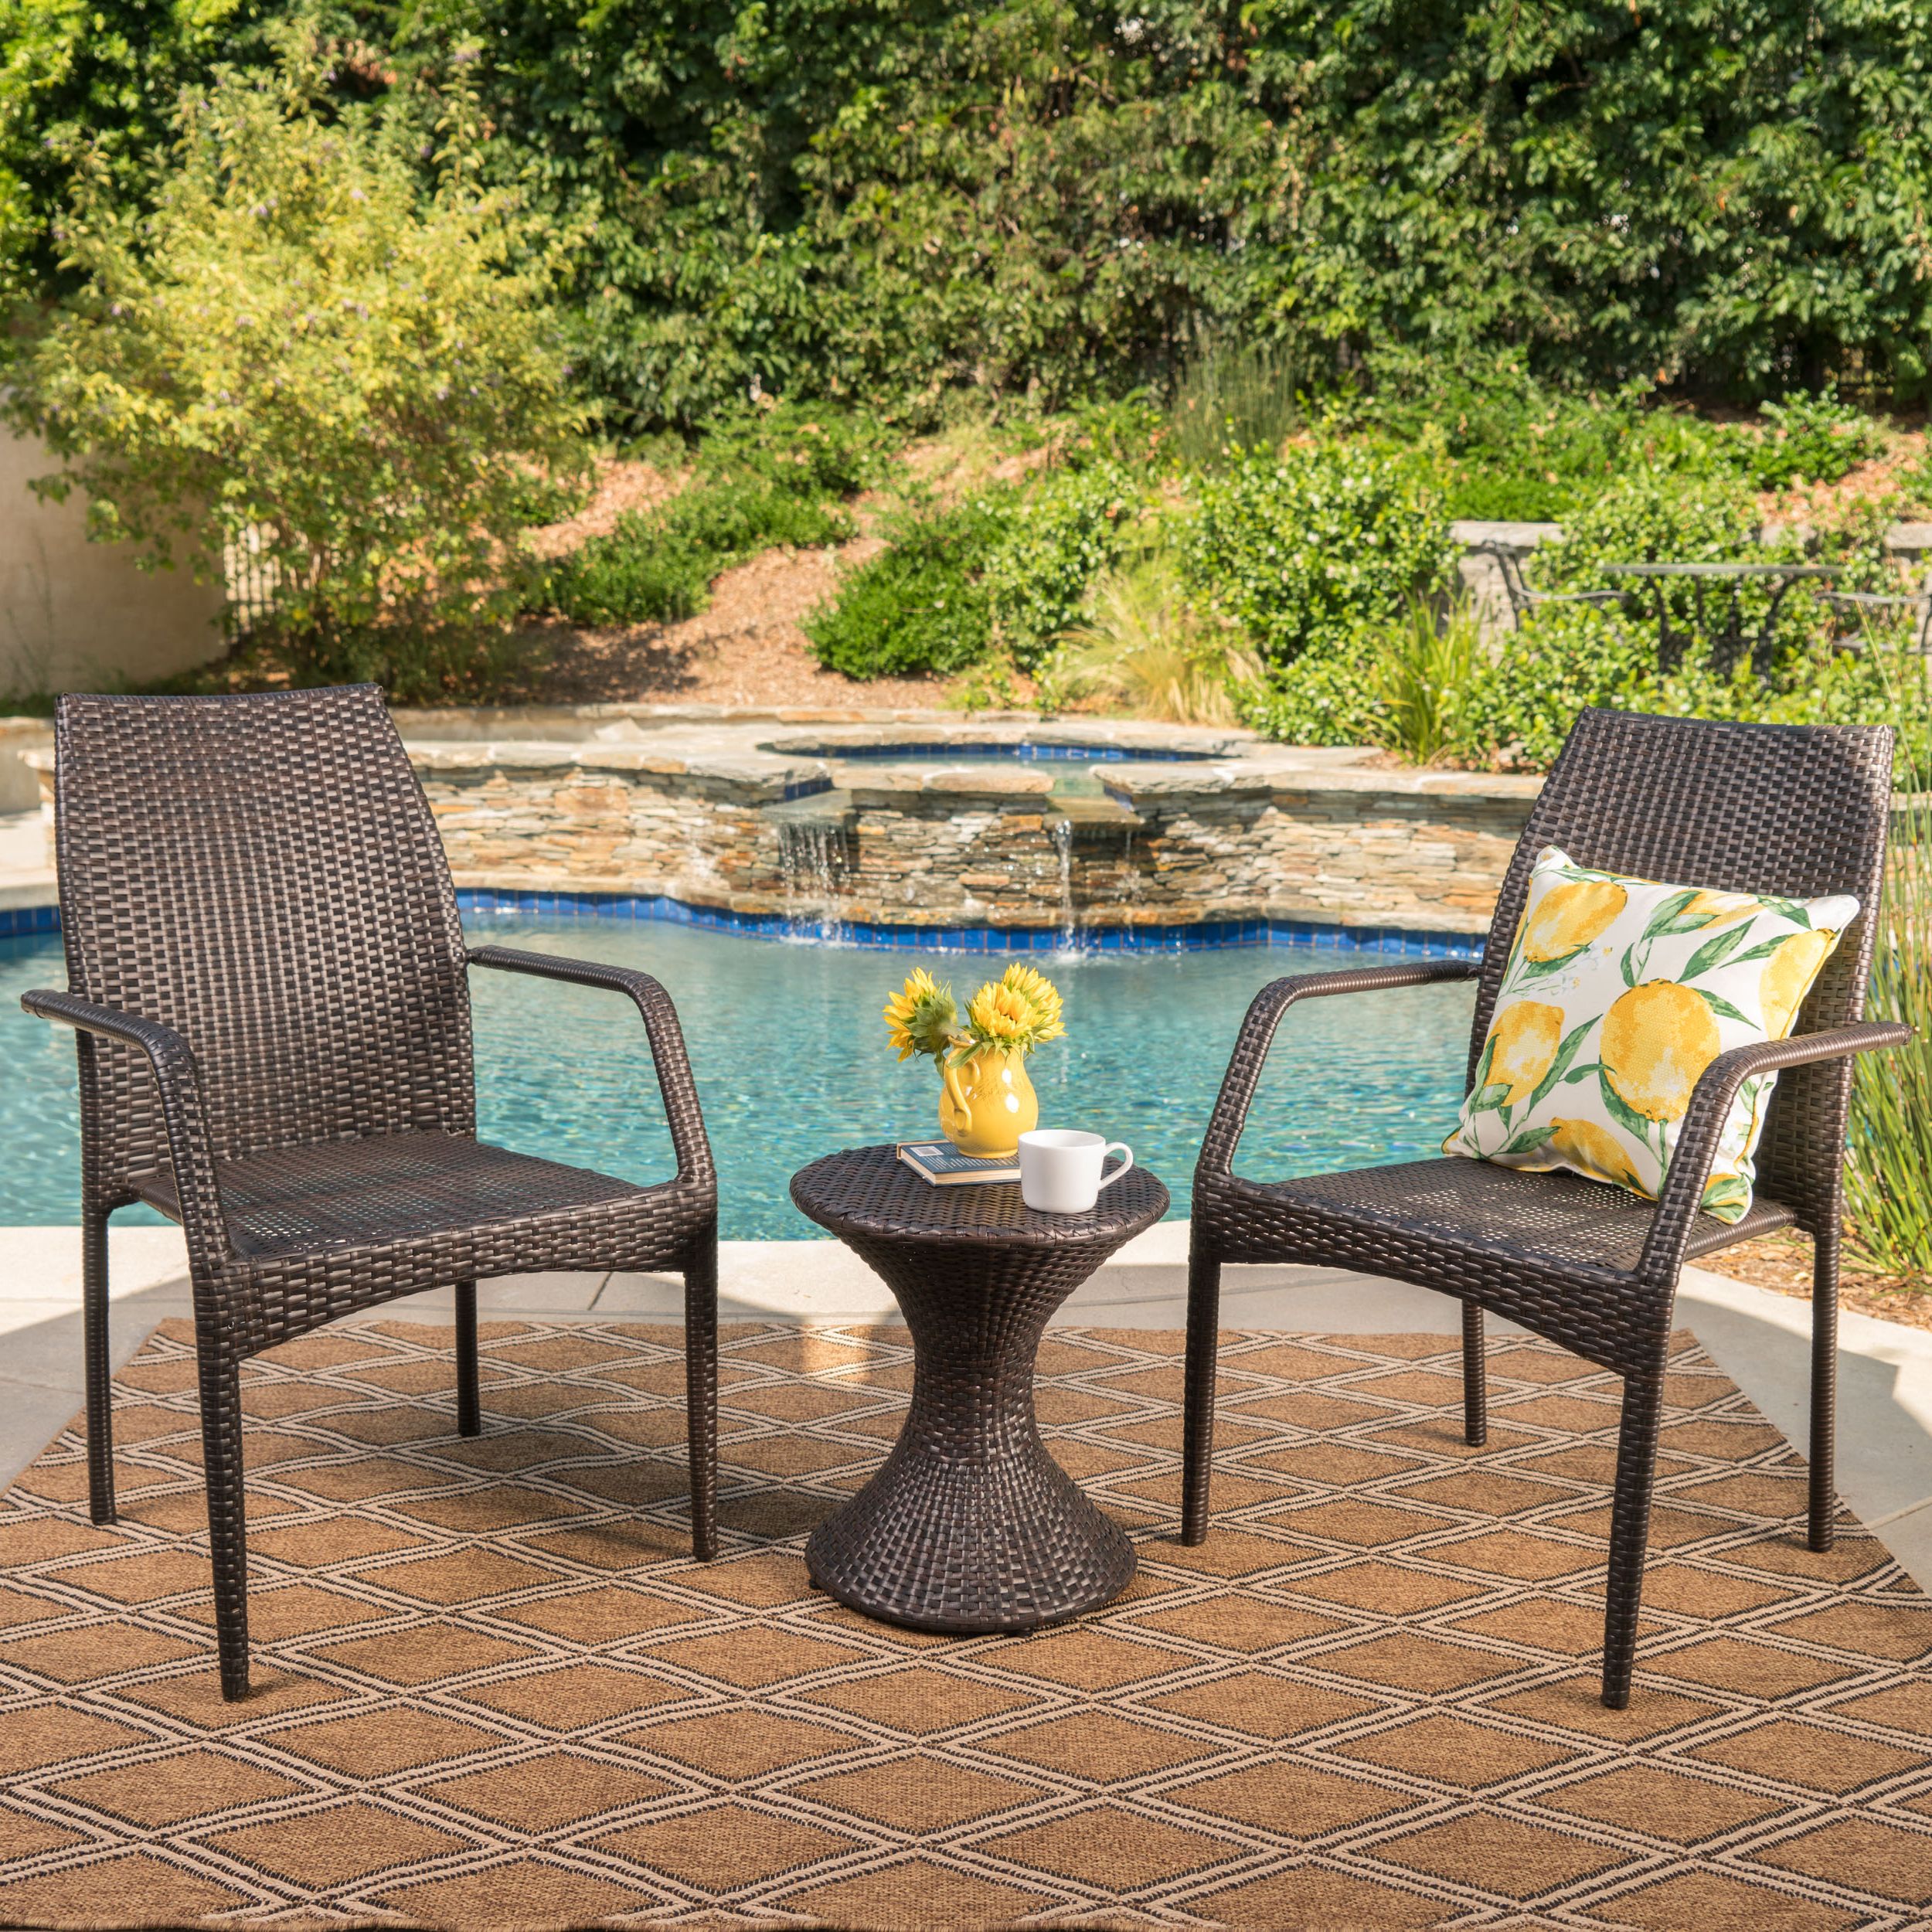 Newest 3 Piece Outdoor Table And Chair Sets Pertaining To Landsbury Outdoor 3 Piece Wicker Chat Set With Stacking Chairs And (View 1 of 15)